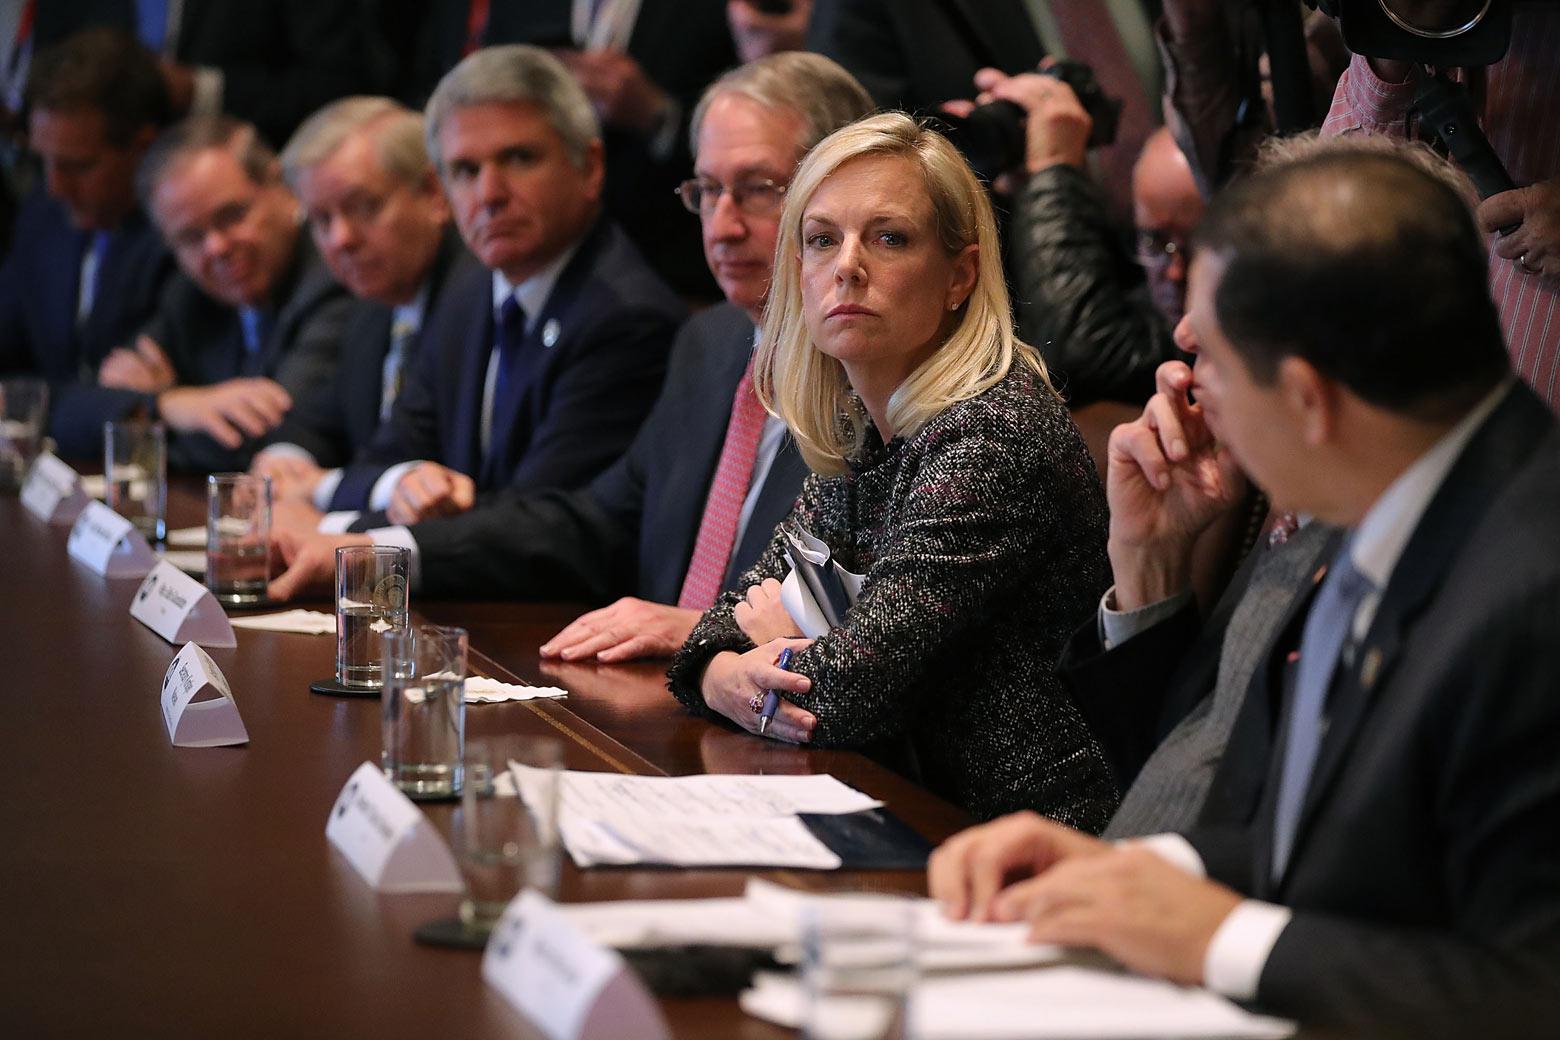 Homeland Security Secretary Kristjen Nielsen joins President Donald Trump and Republican and Democrat members of Congress for a meeting on immigration on Tuesday in Washington.